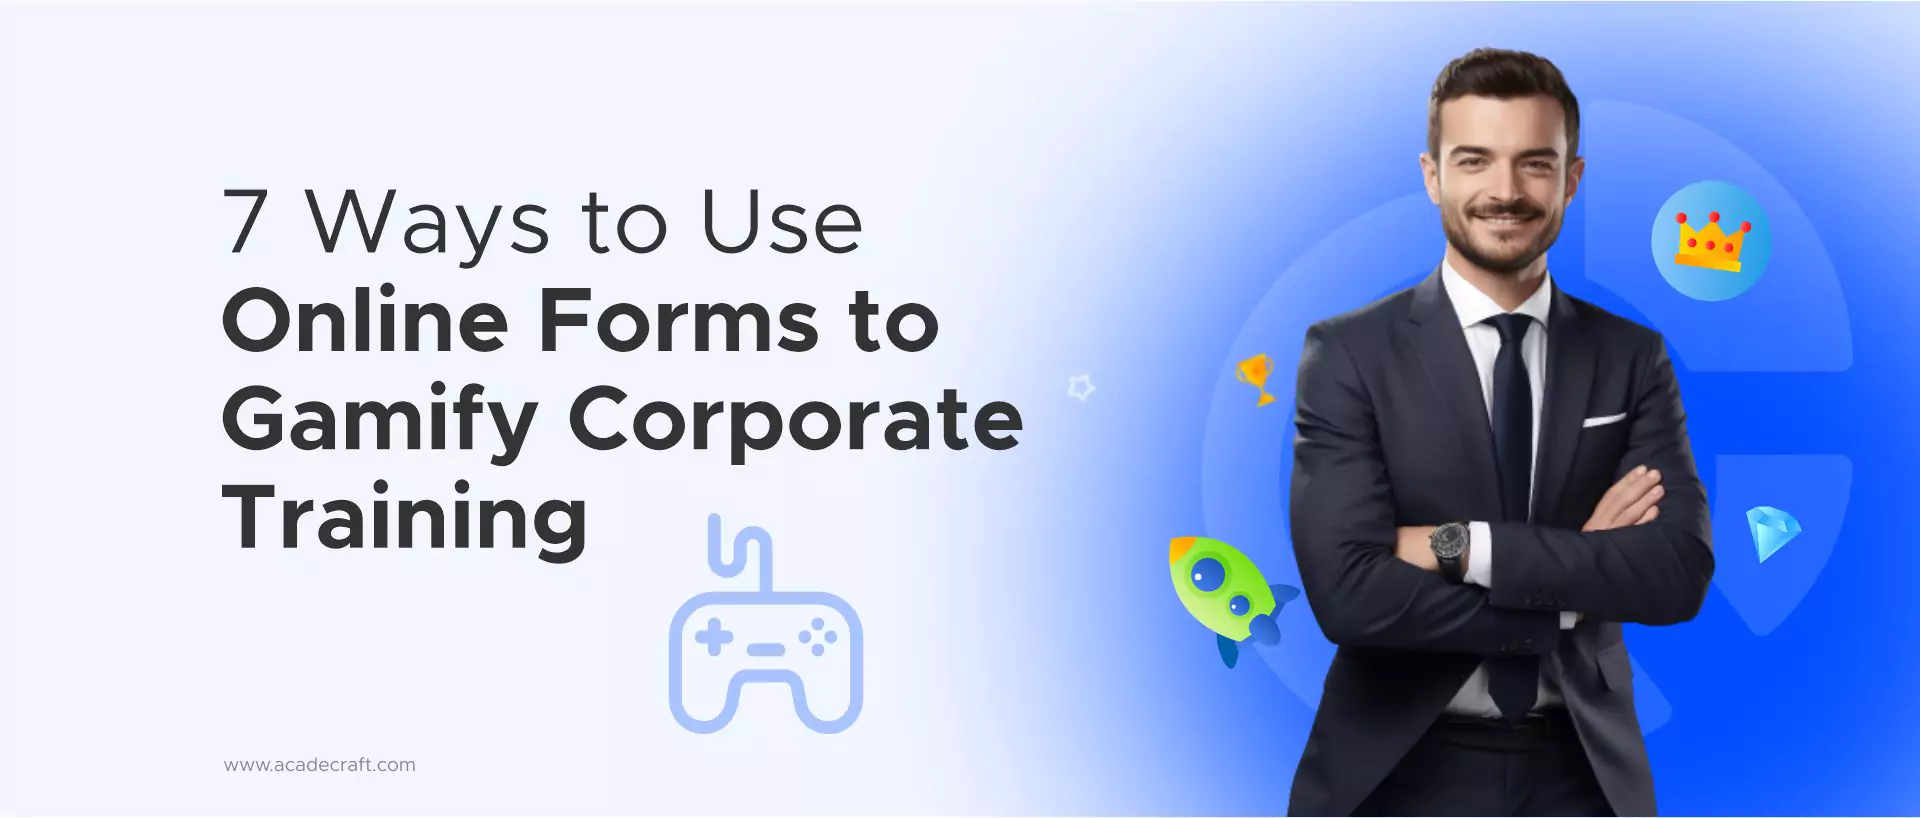 Online Forms to Gamify Corporate Training